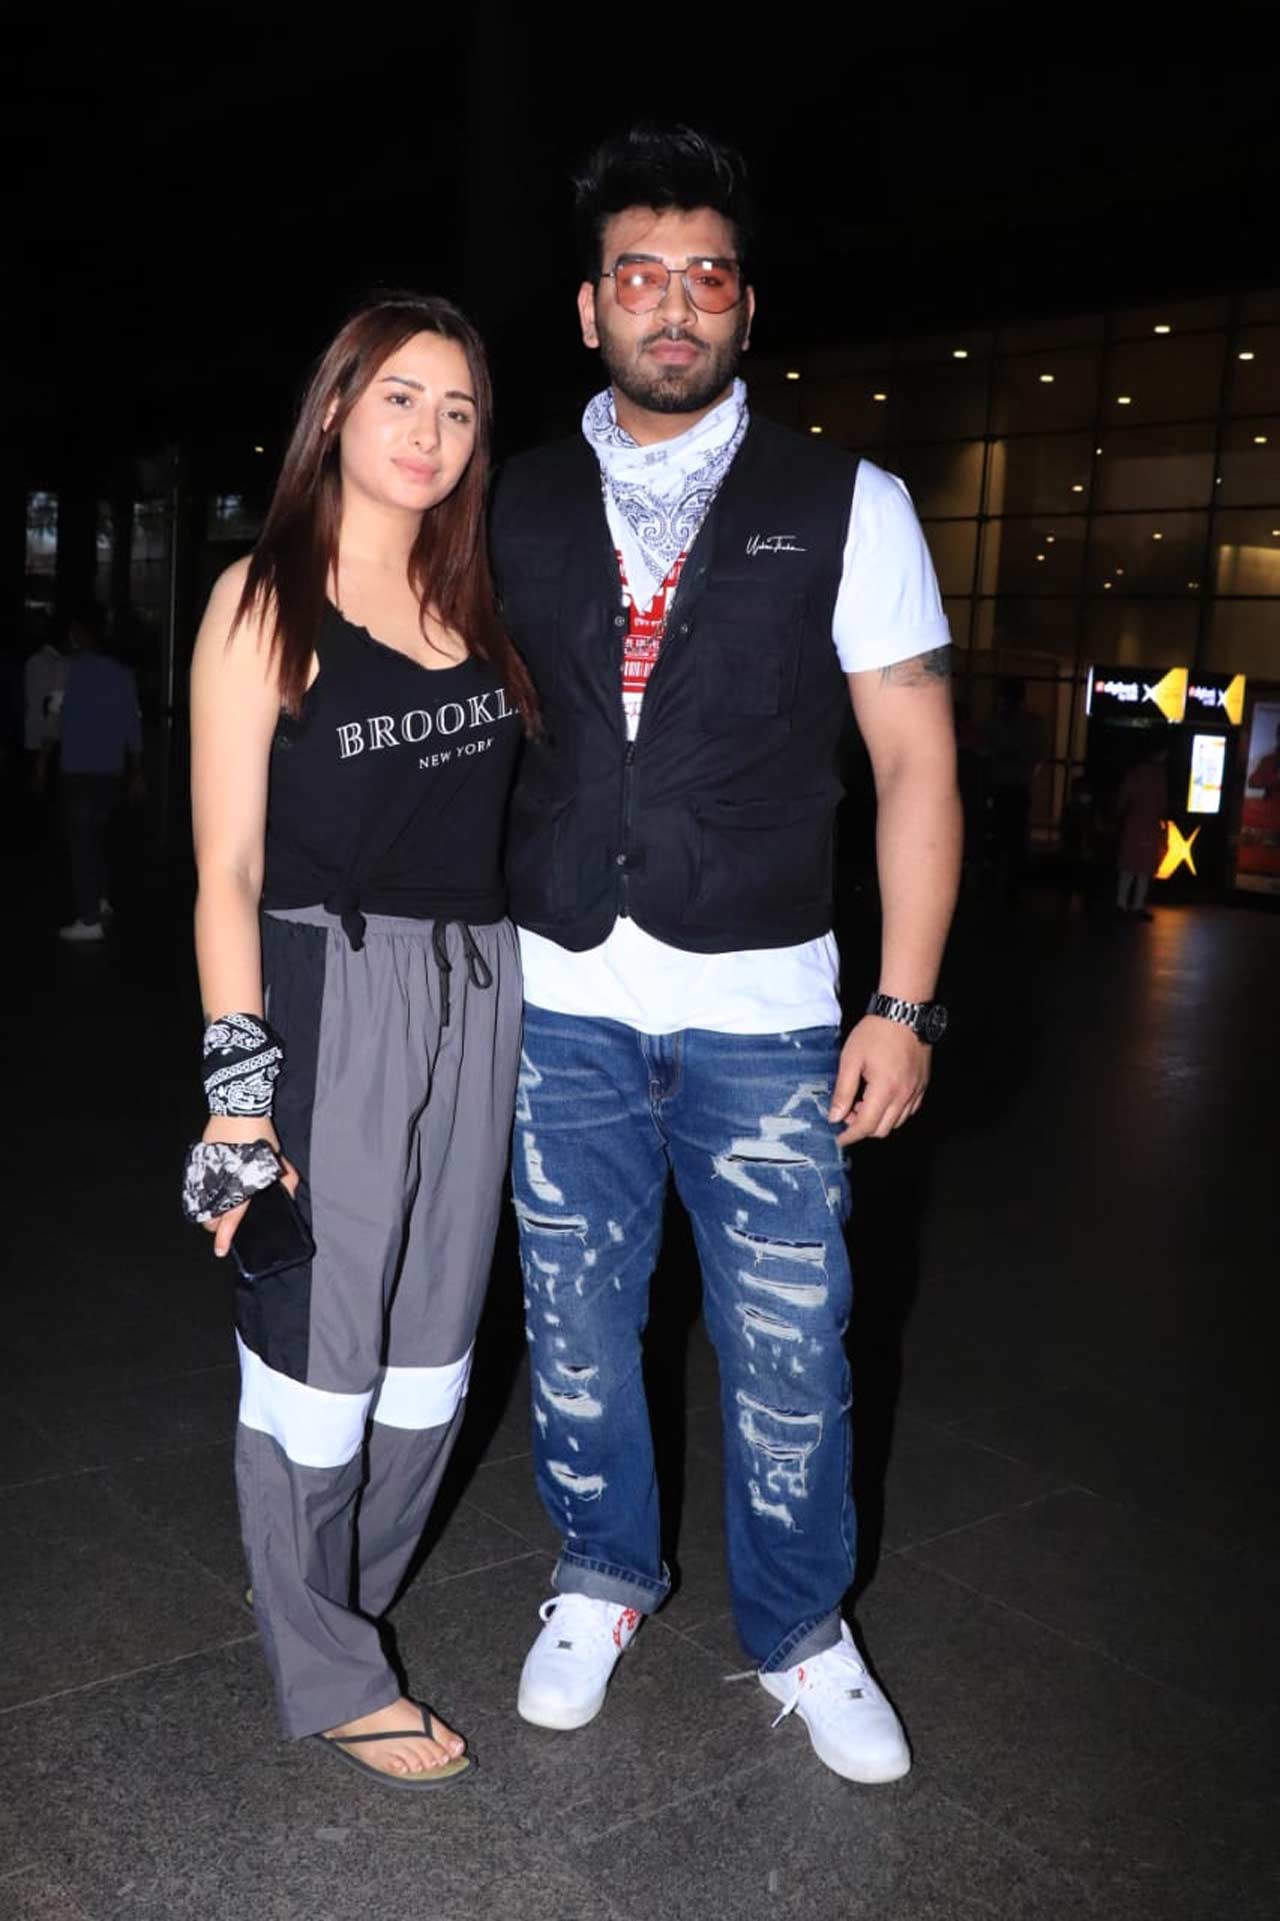 Paras Chabbra and Mahira Sharma were also clicked at the airport. Speaking about the duo, Paras and Mahira took over the internet with their new single Rand Lageya, and they were clicked celebrating success by distributing chocolates to the paparazzi.